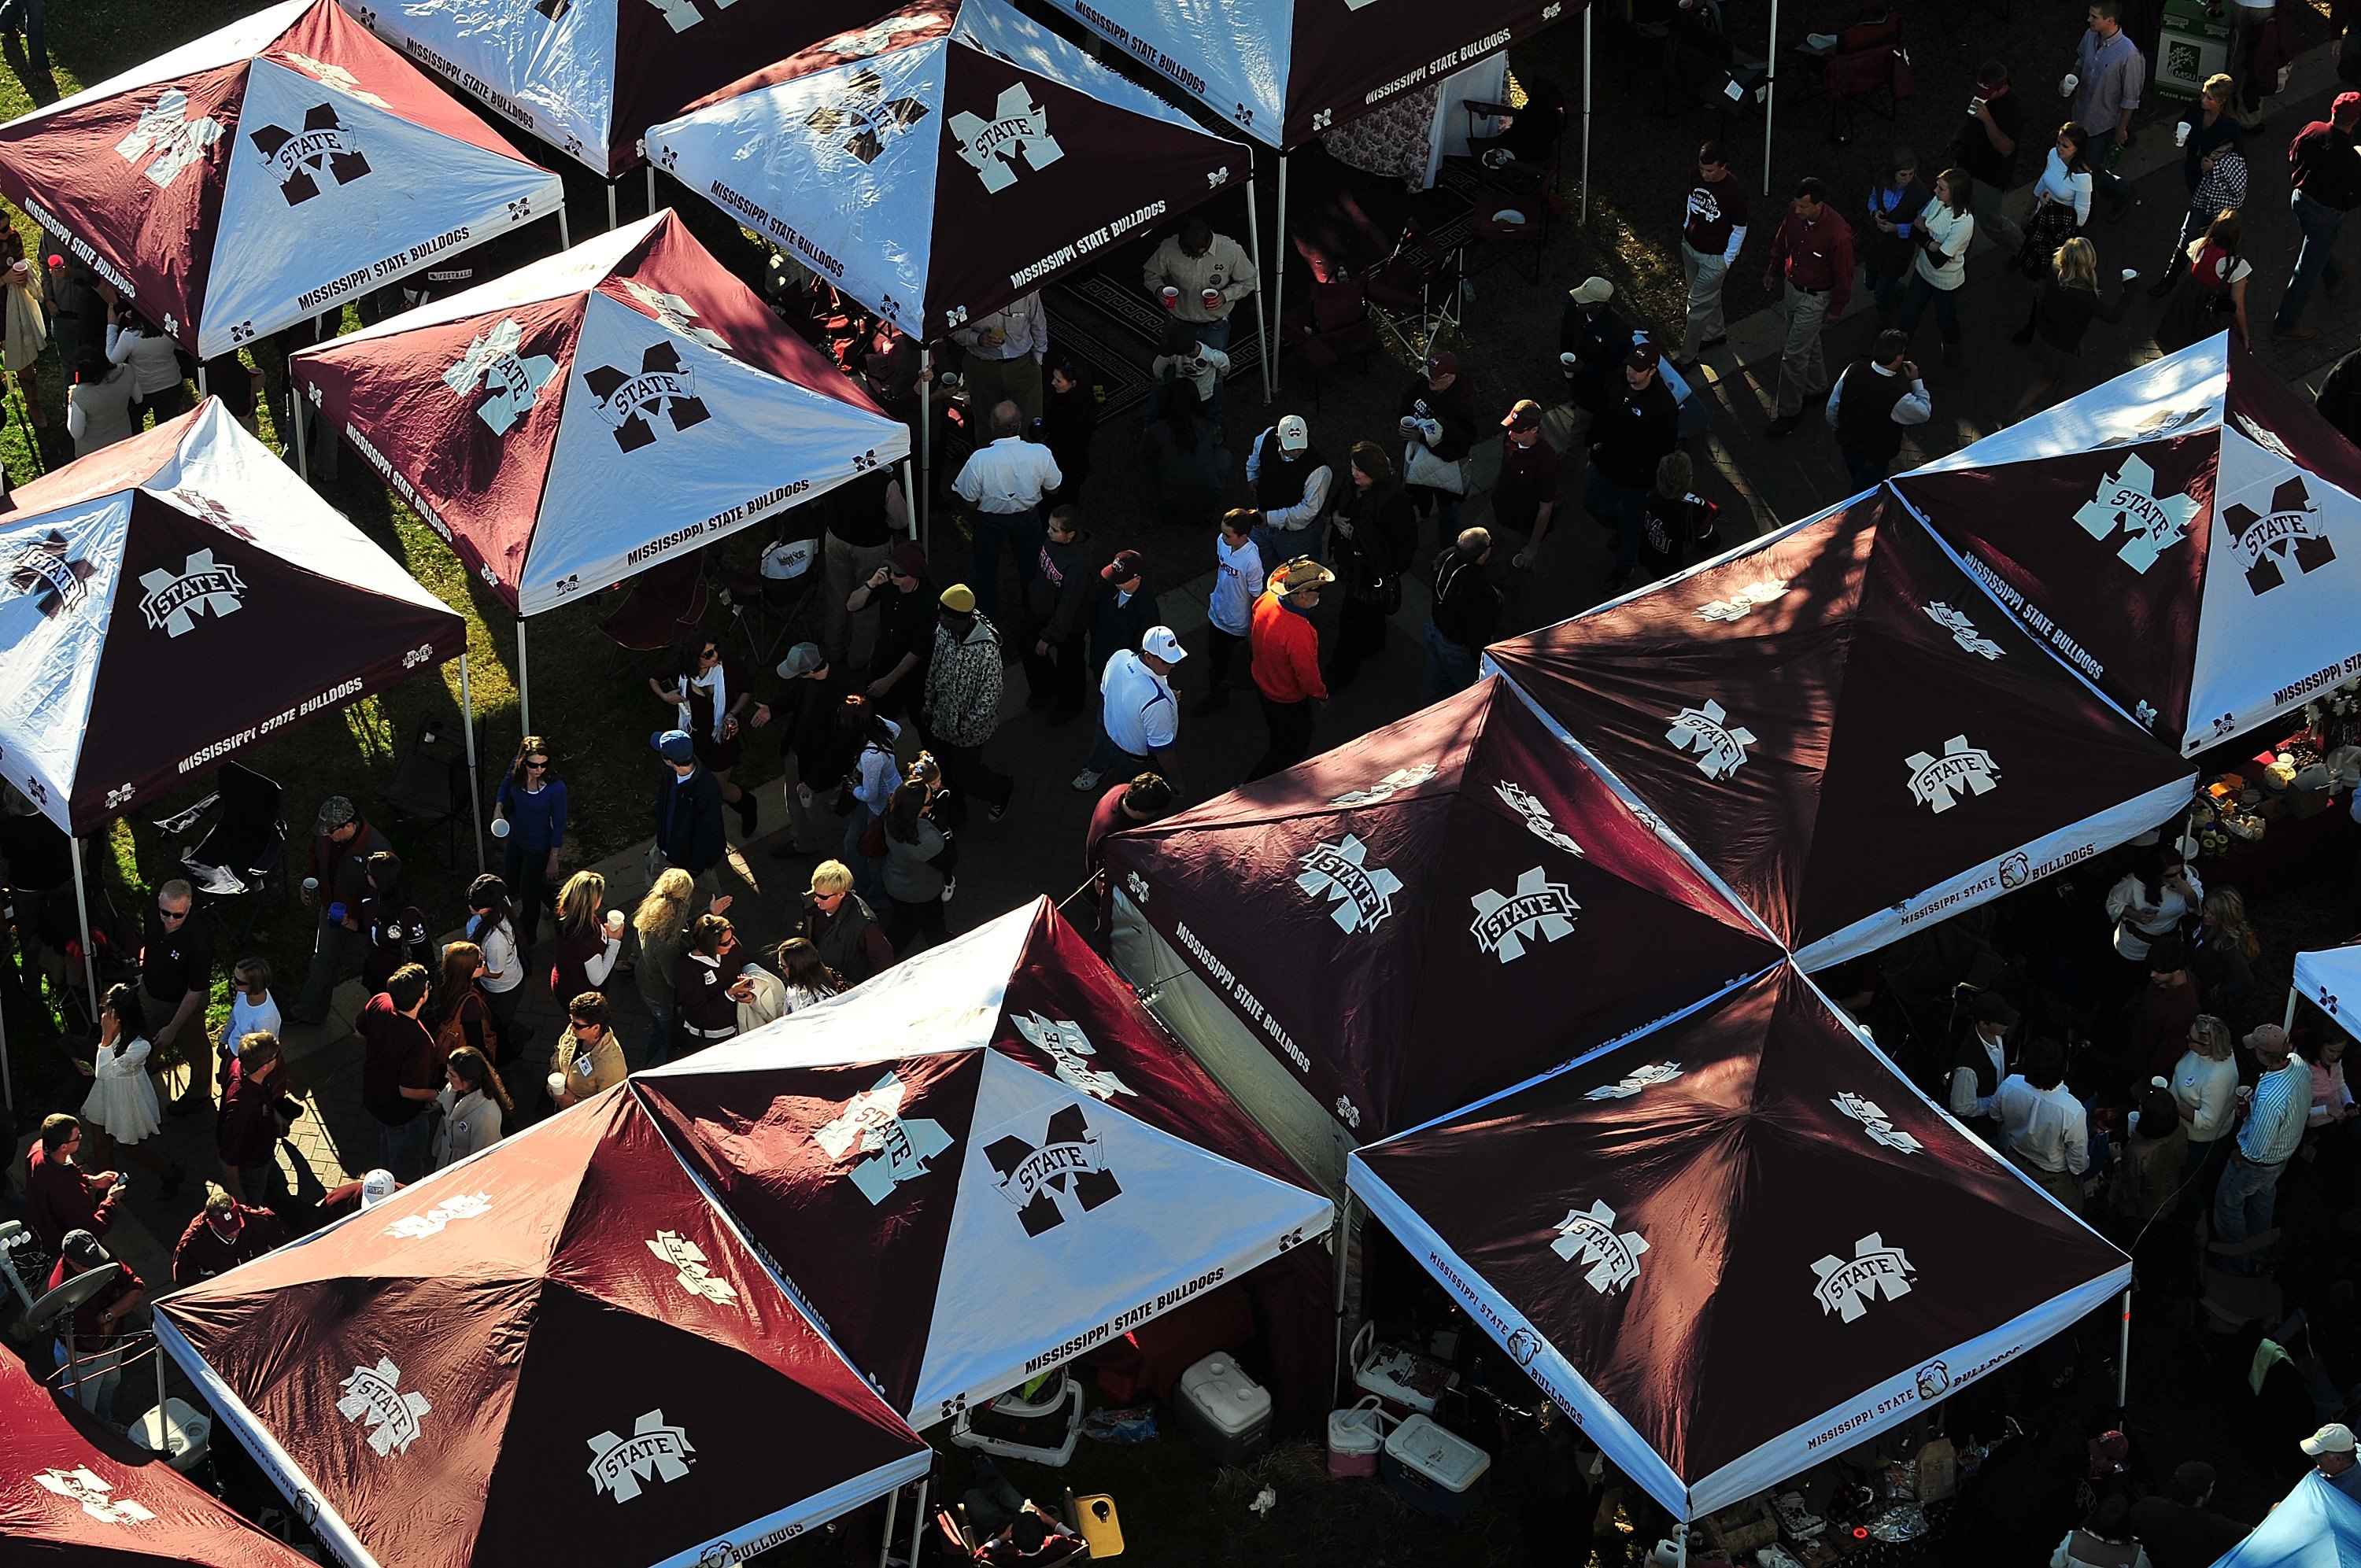 STARKVILLE, MS - OCTOBER 24:  Fans tailgating prior to the Mississippi State v University of Florida Gator game, at Davis Wade Stadium on  October 24, 2009 in Starkville, Mississippi  (Photo by Rick Dole/Getty Images)